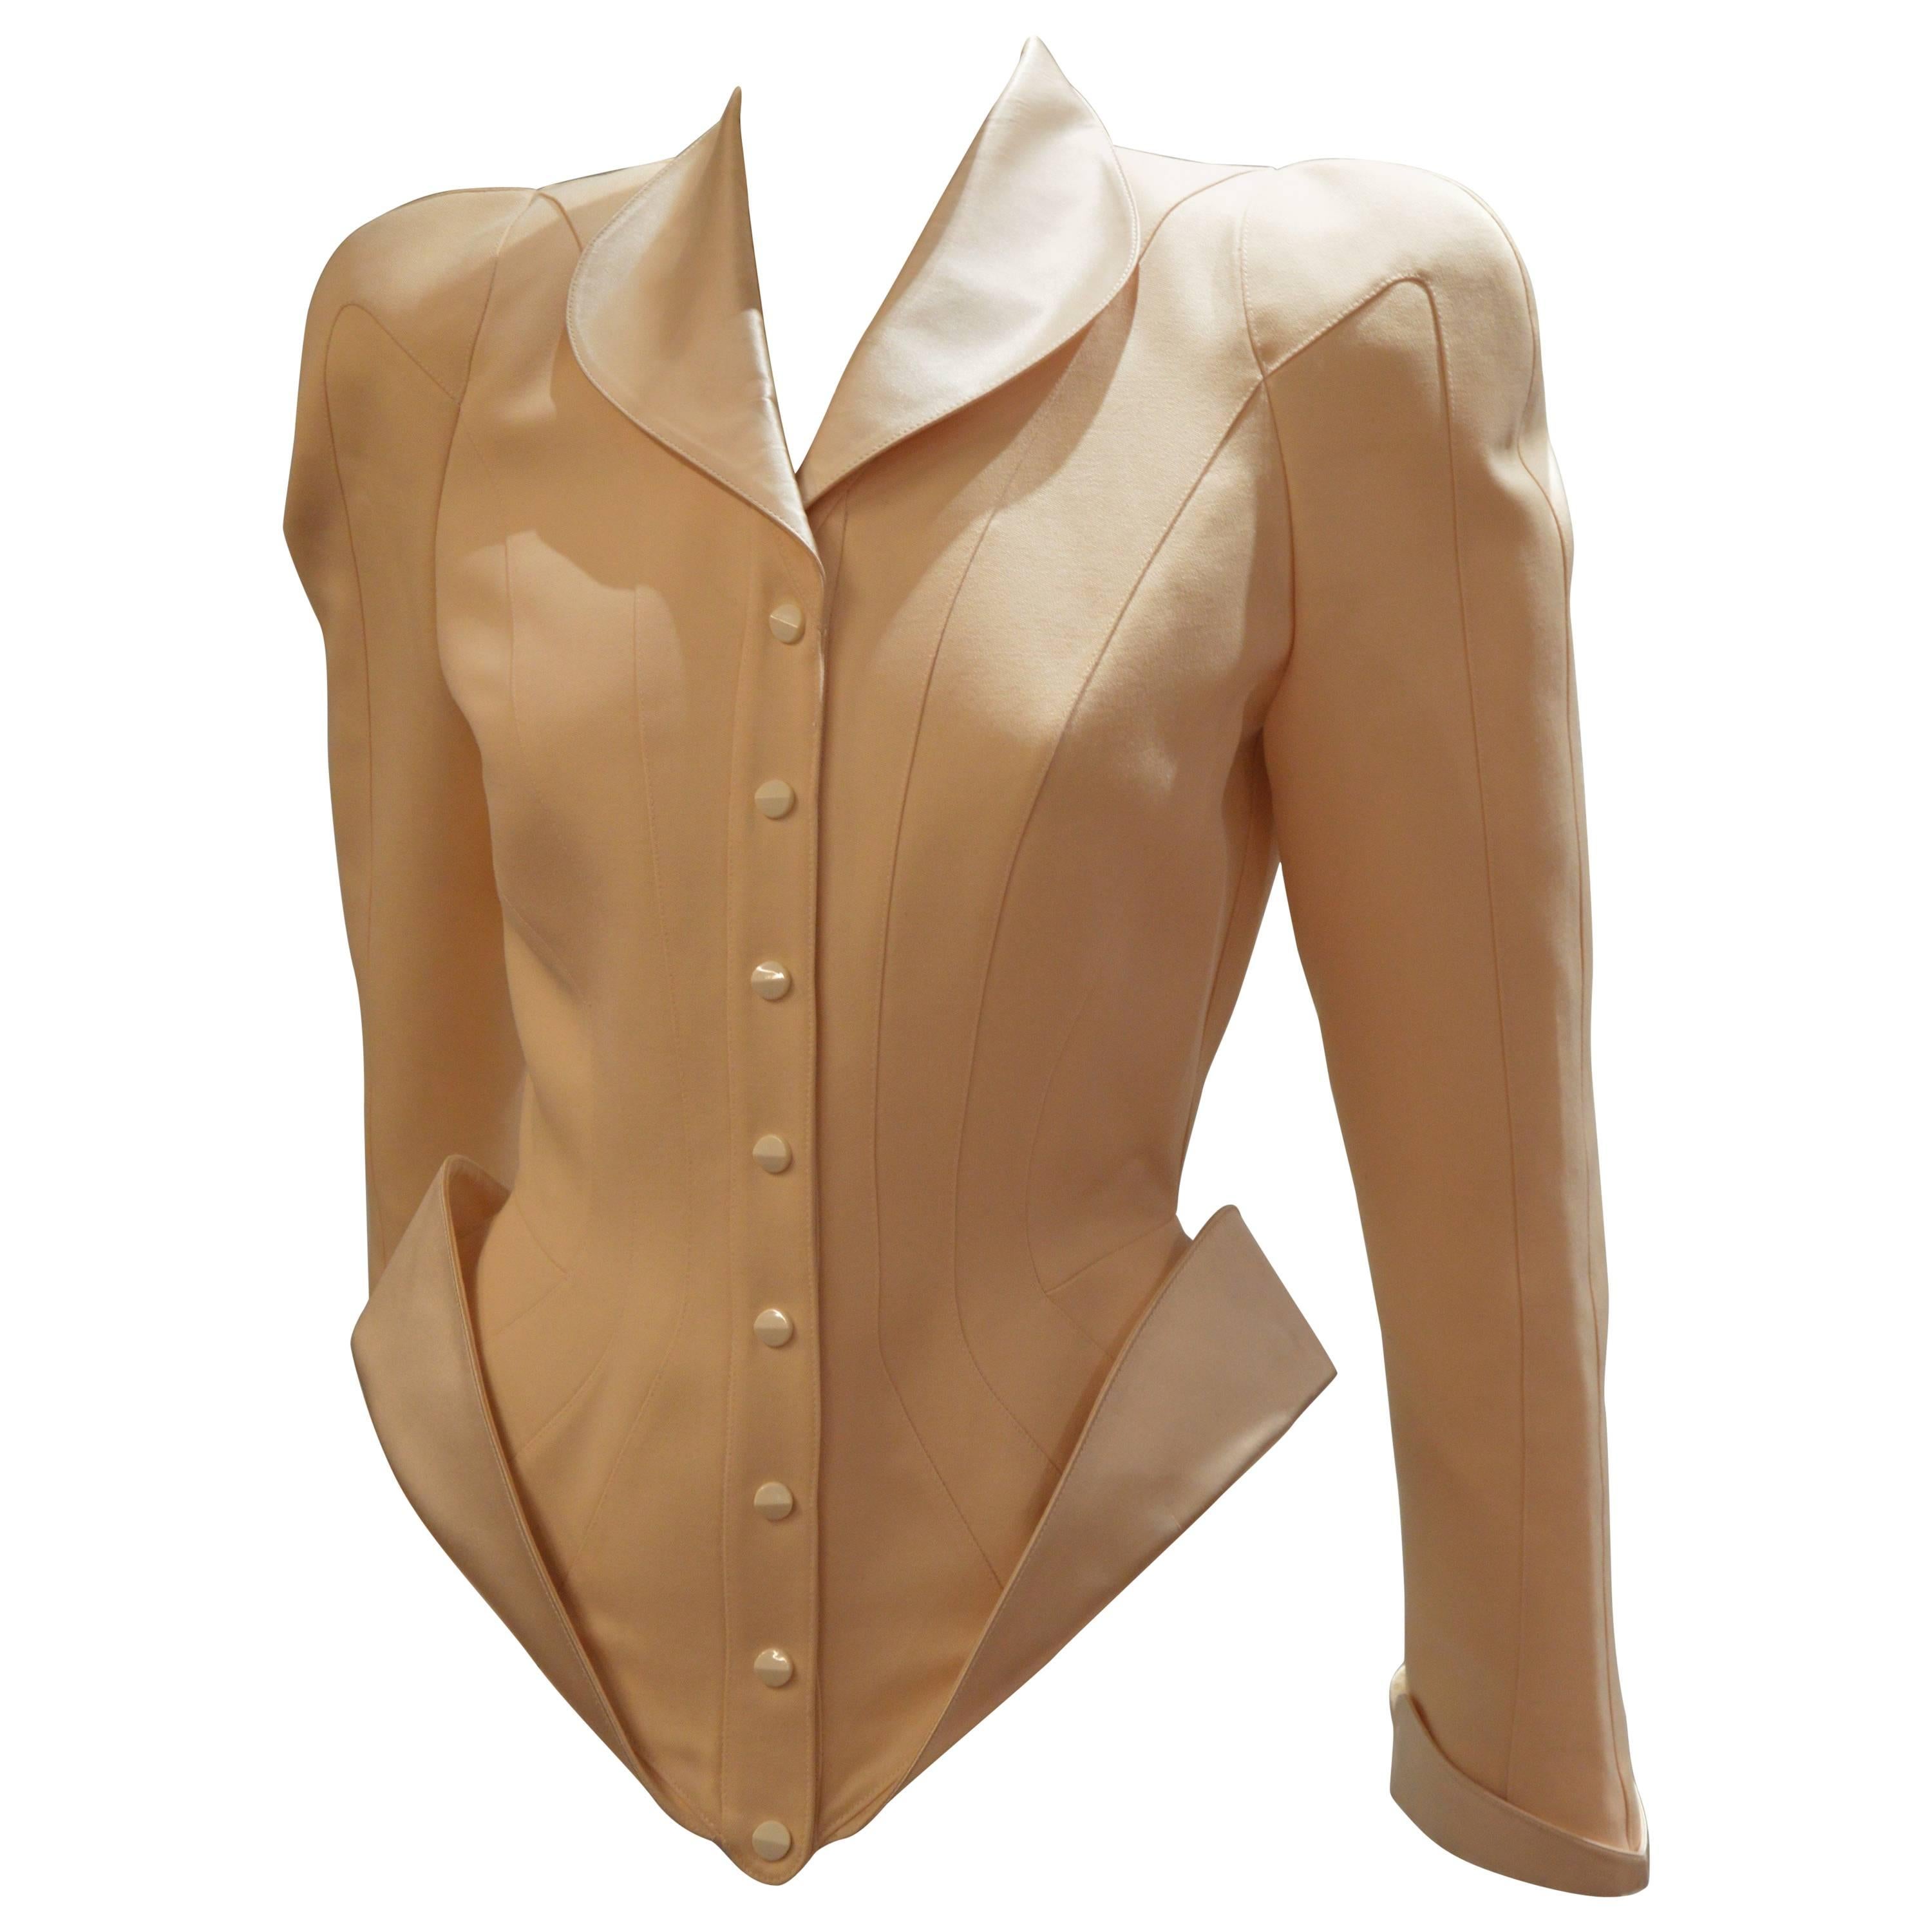 Thierry Mugler is known for his talented futuristic suits cut and shape. This off-white wool and silk tuxedo two pieces skirt suit is a real Mugler statement, strong and elegant women ahead of their time and fashion.
Very good condition, it is a 38